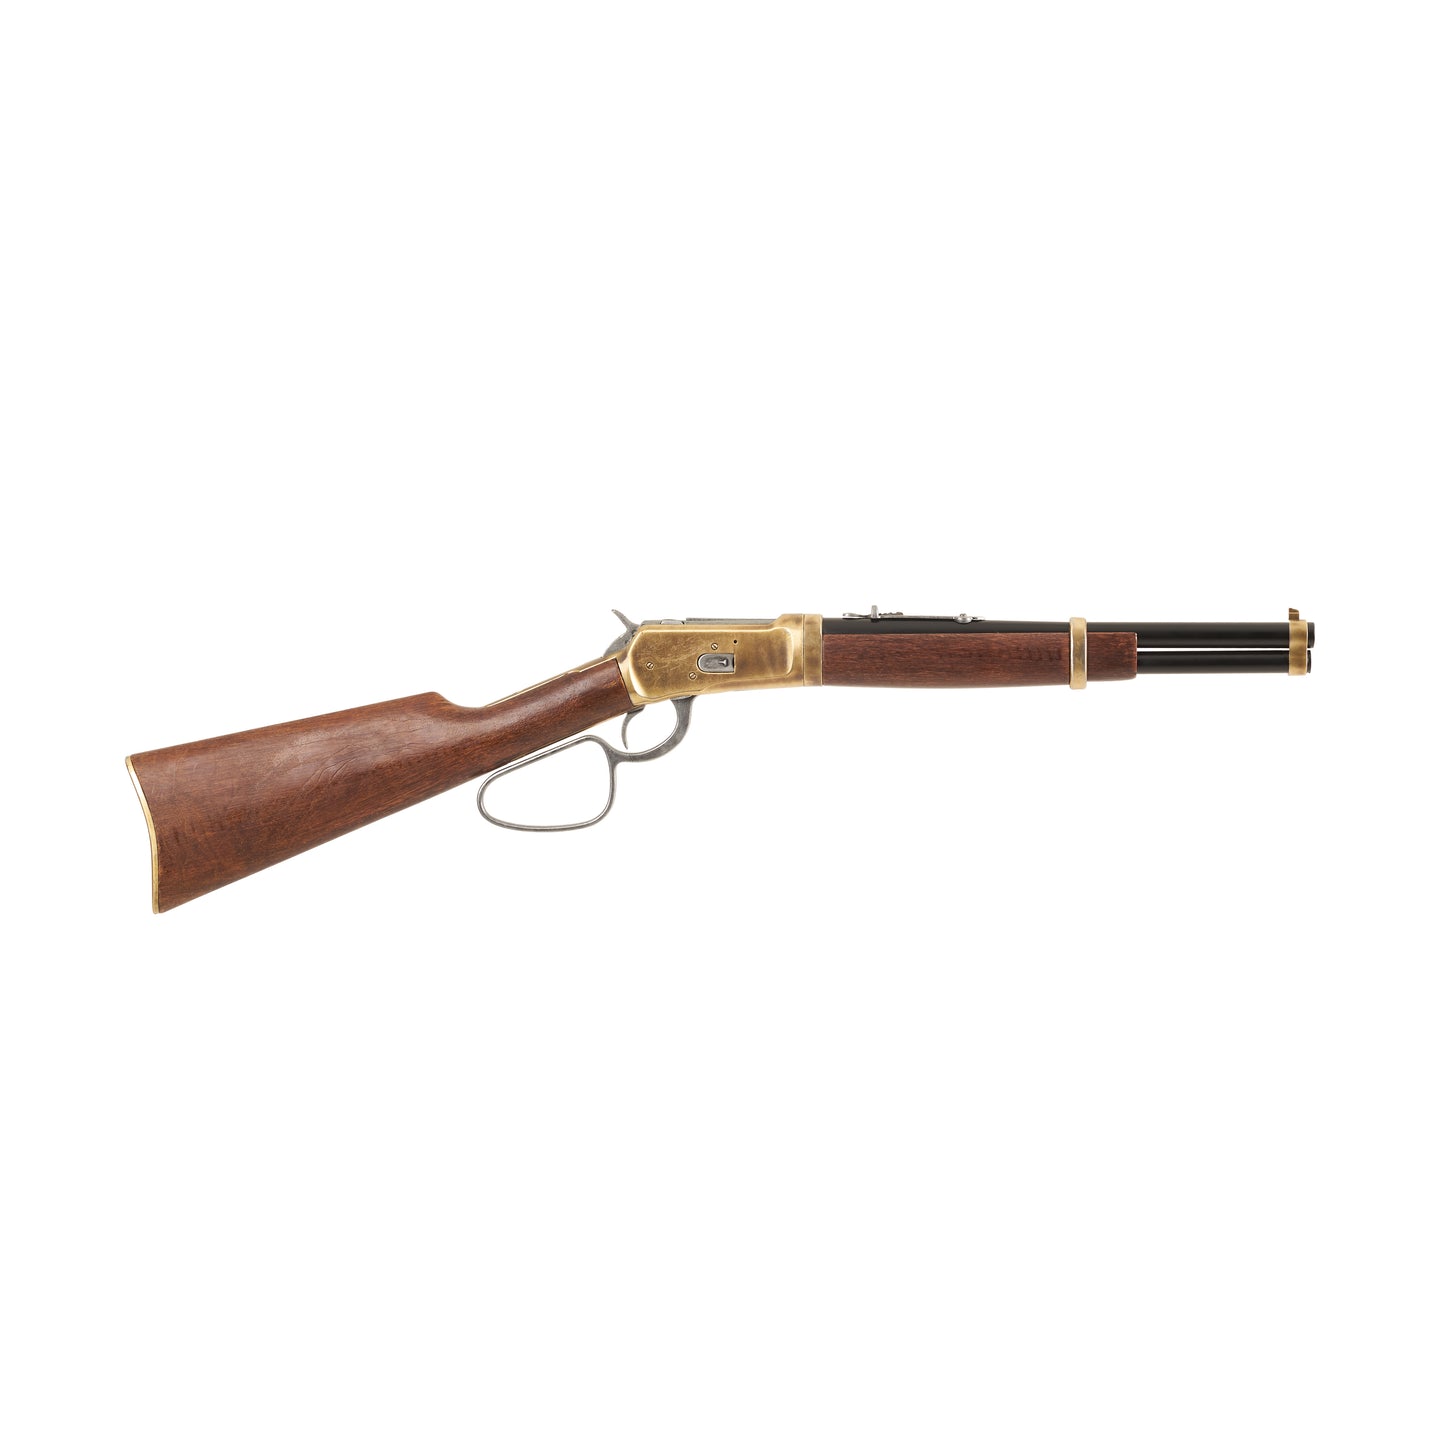 Right side  view of 1892 Old West Rifle with brass mechanism and trim, wood stock, and black barrel.